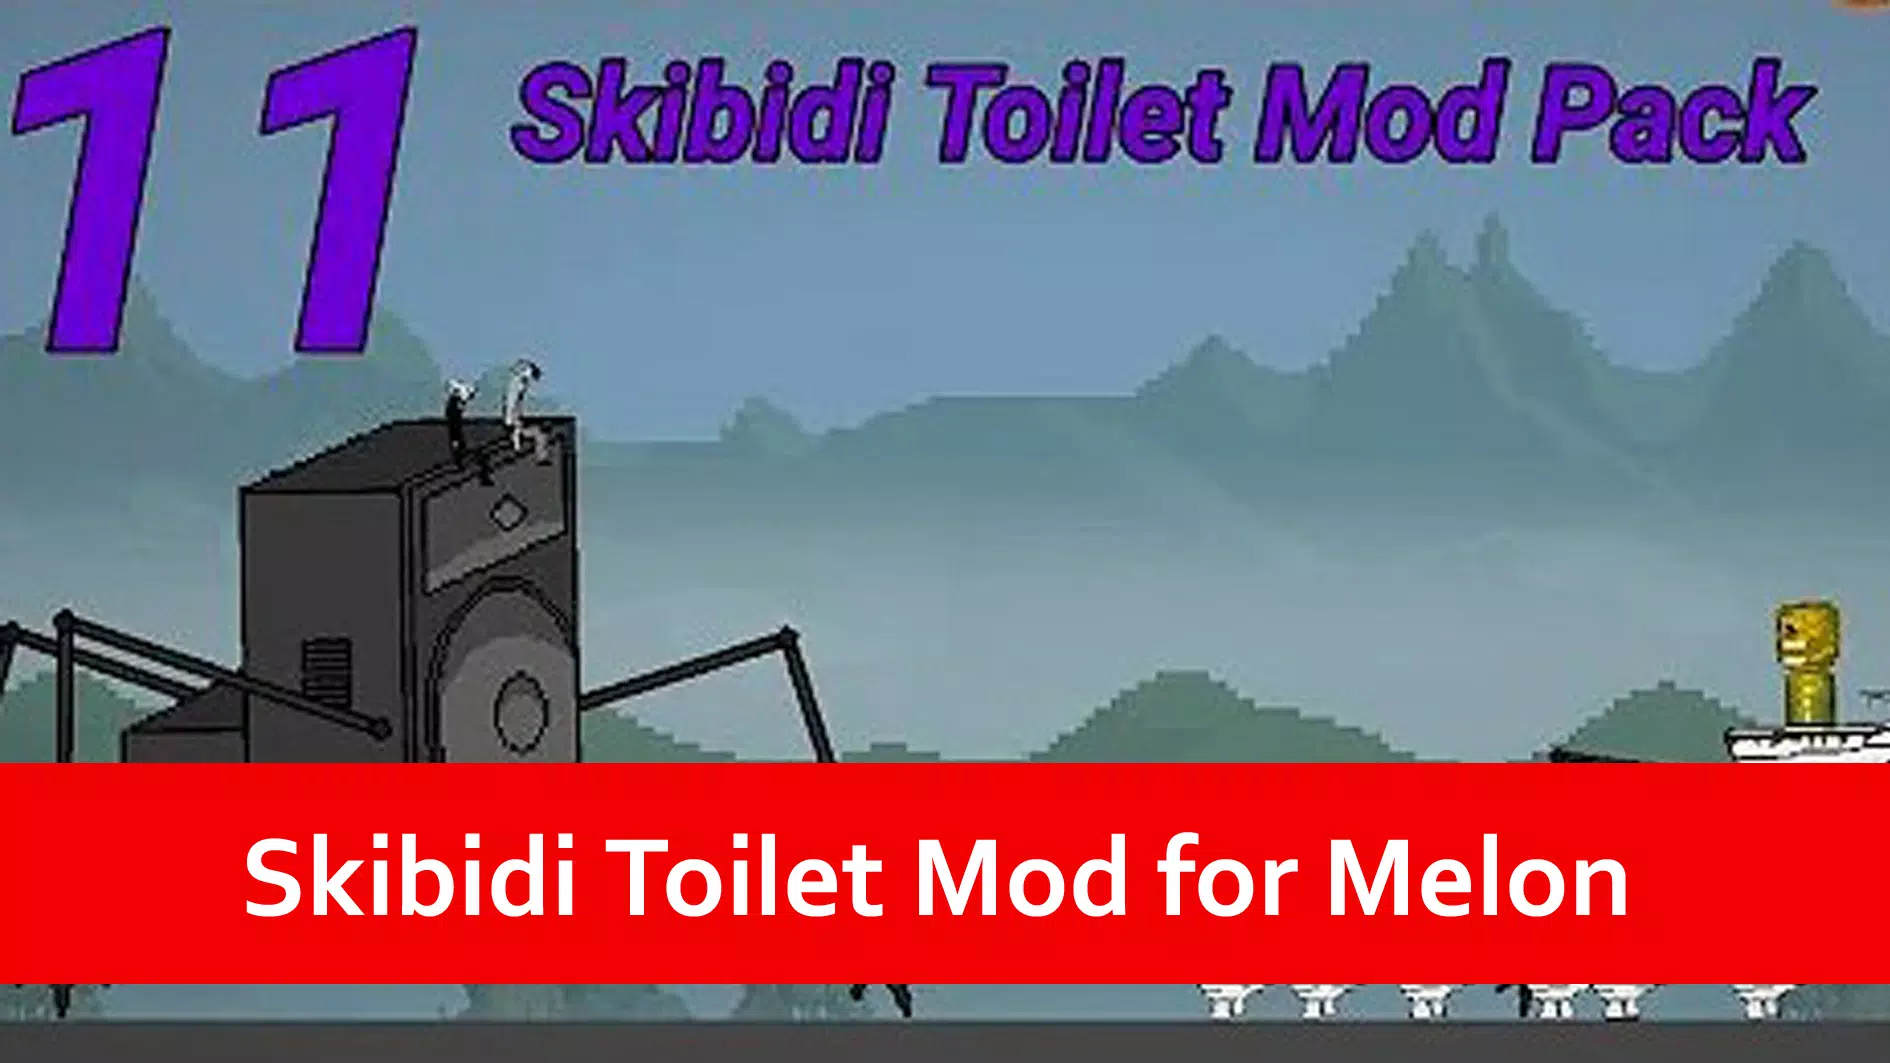 Toilet for Melon Playground on the App Store